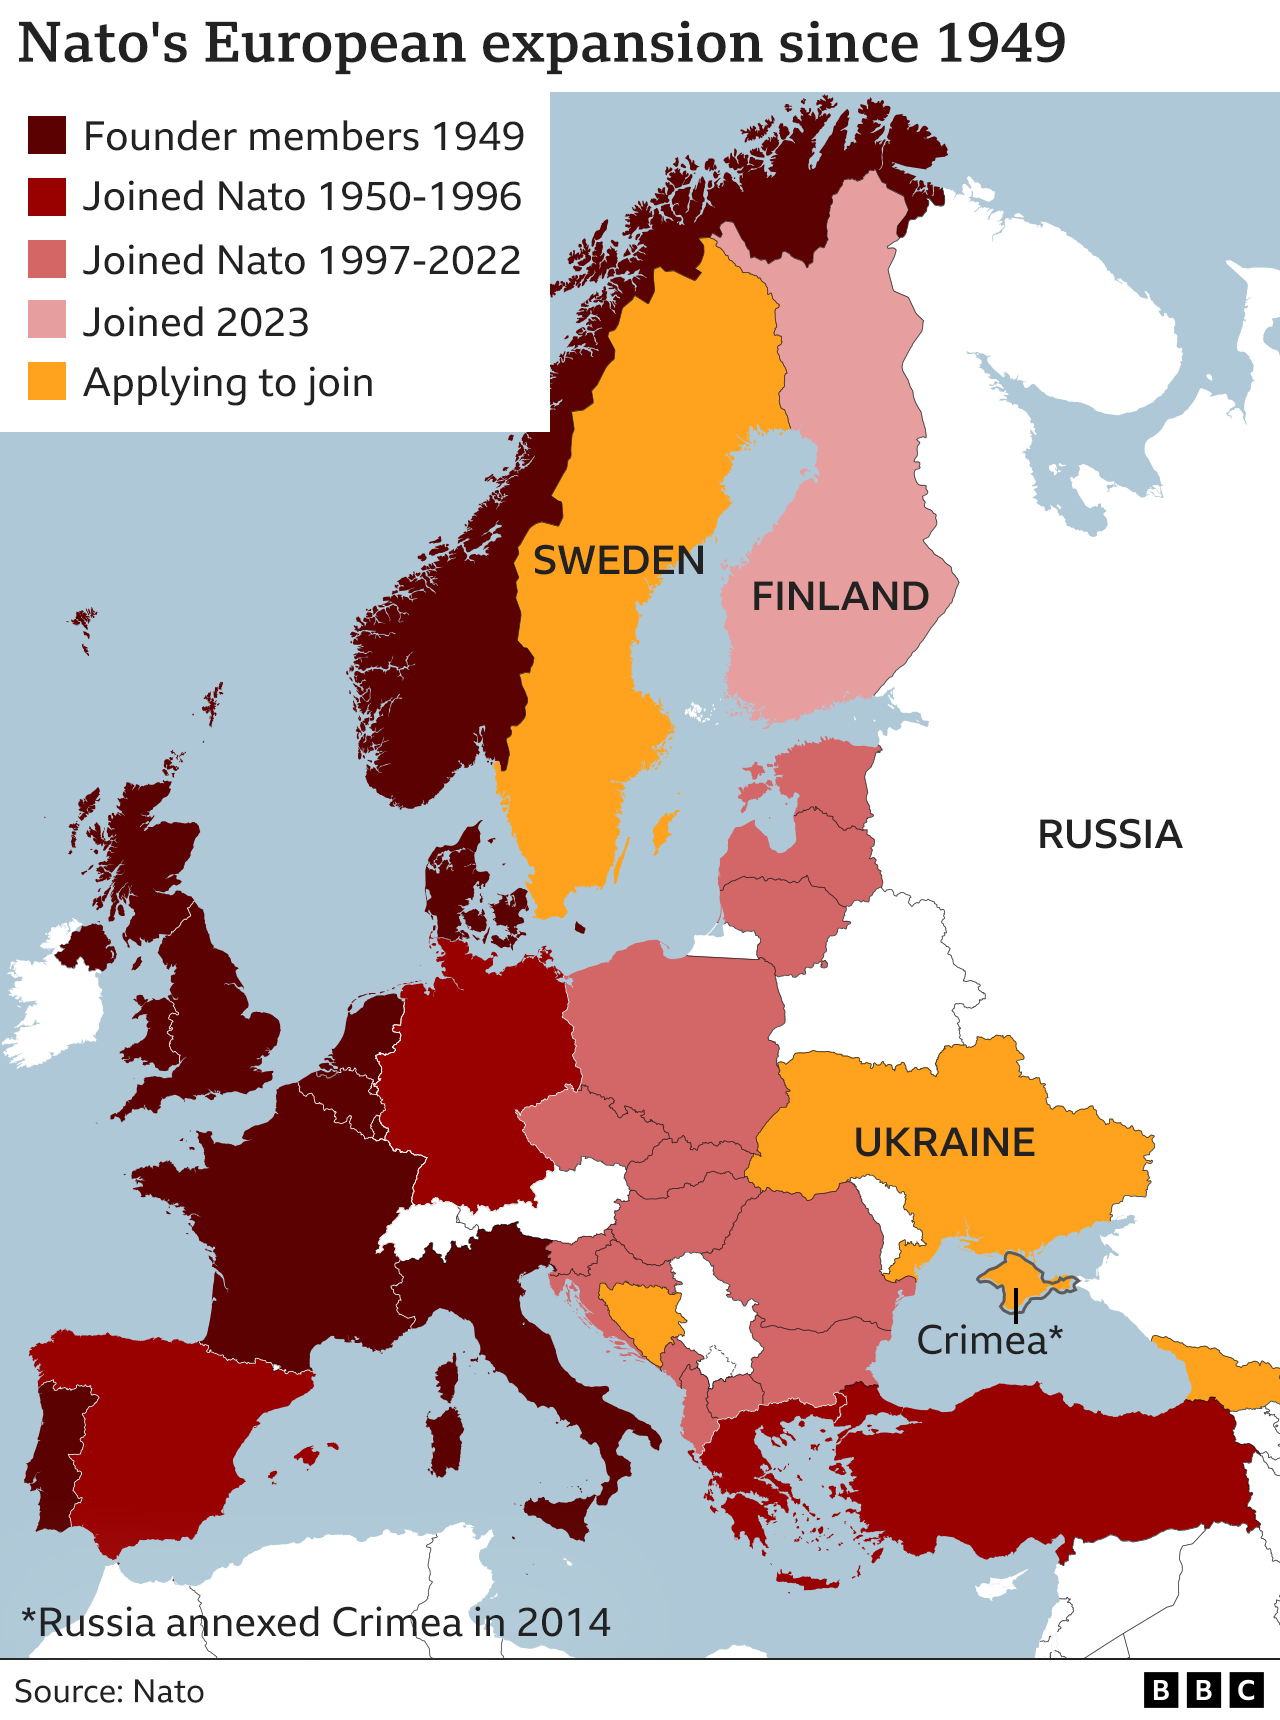 Nato member states, including those which have joined since 1997 (Albania, Bulgaria, Czech Republic, Hungary, Poland, Romania, Slovakia, Latvia, Lithuania, Estonia) and those applying to join now (Sweden, Ukraine, Georgia, Bosnia & Herzegovina) (map used from July 2022)